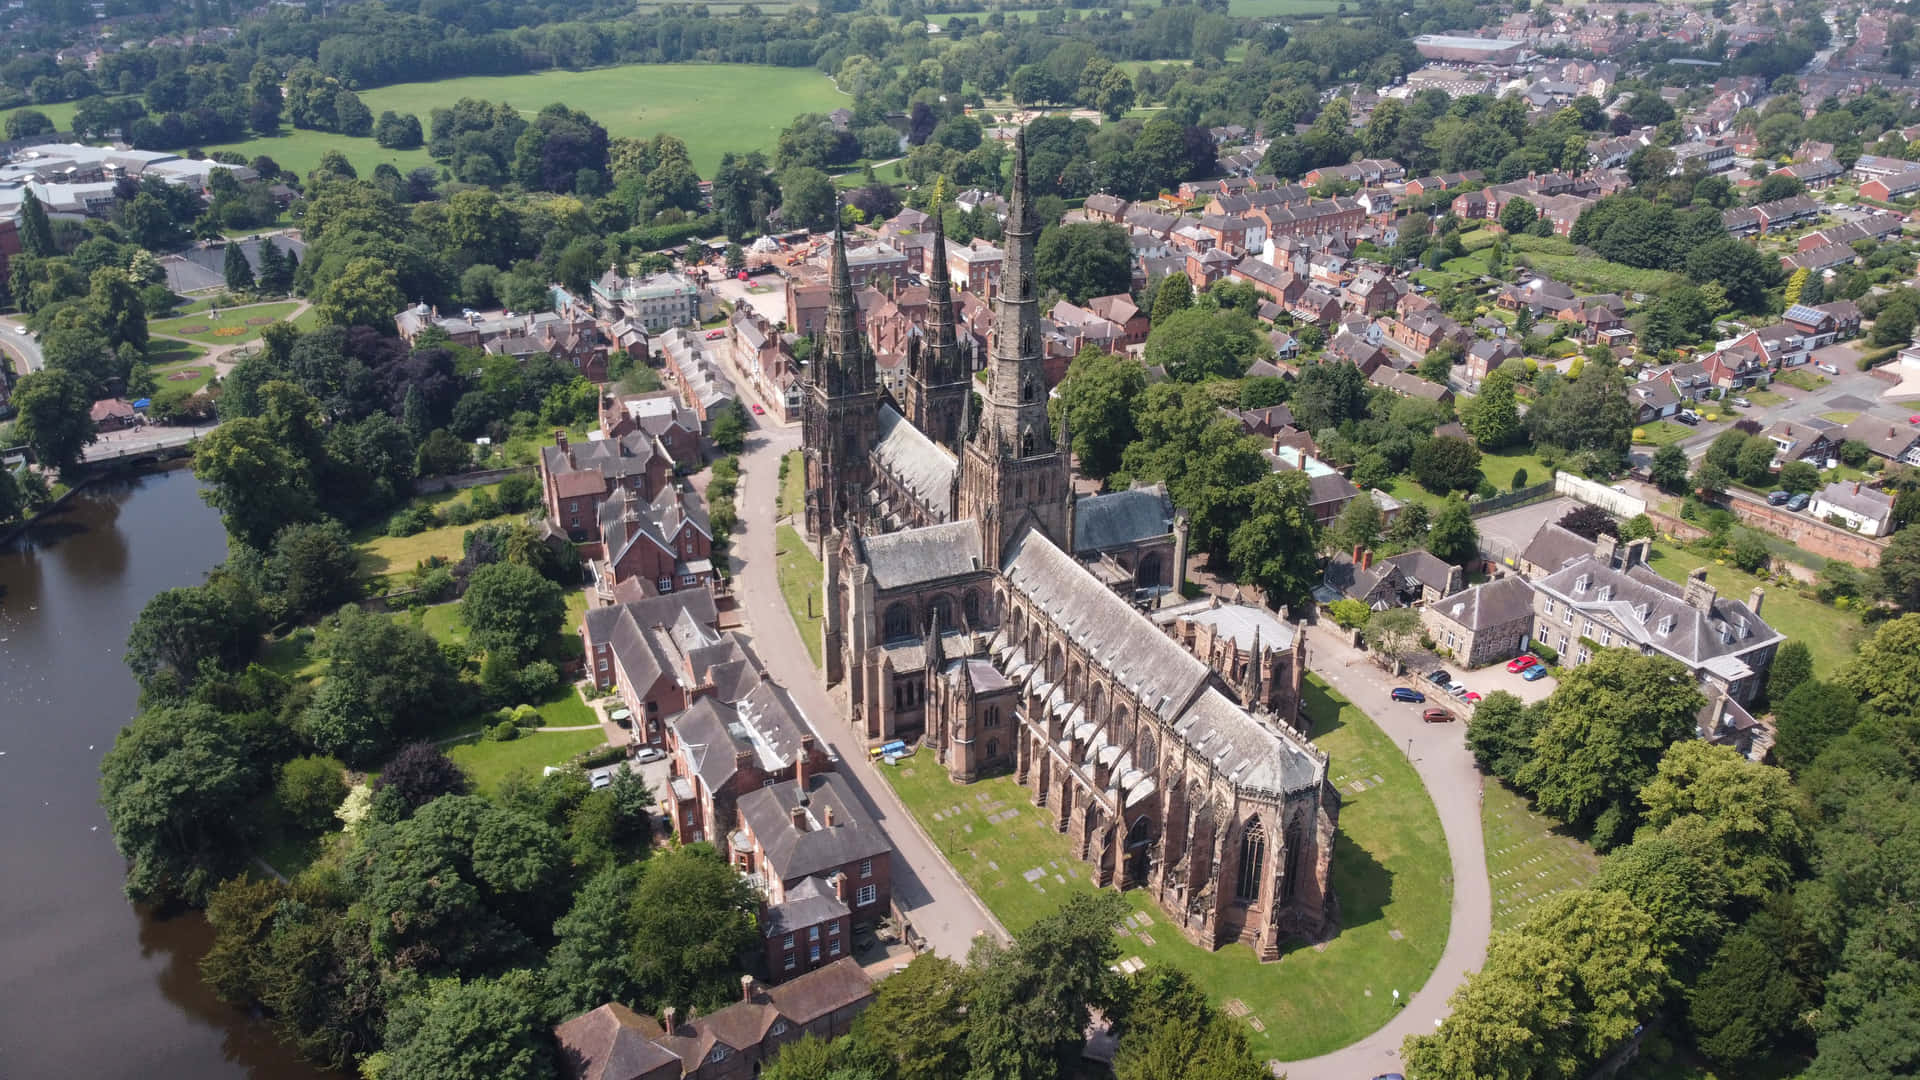 Aerial Viewof Lichfield Cathedraland Surroundings Wallpaper